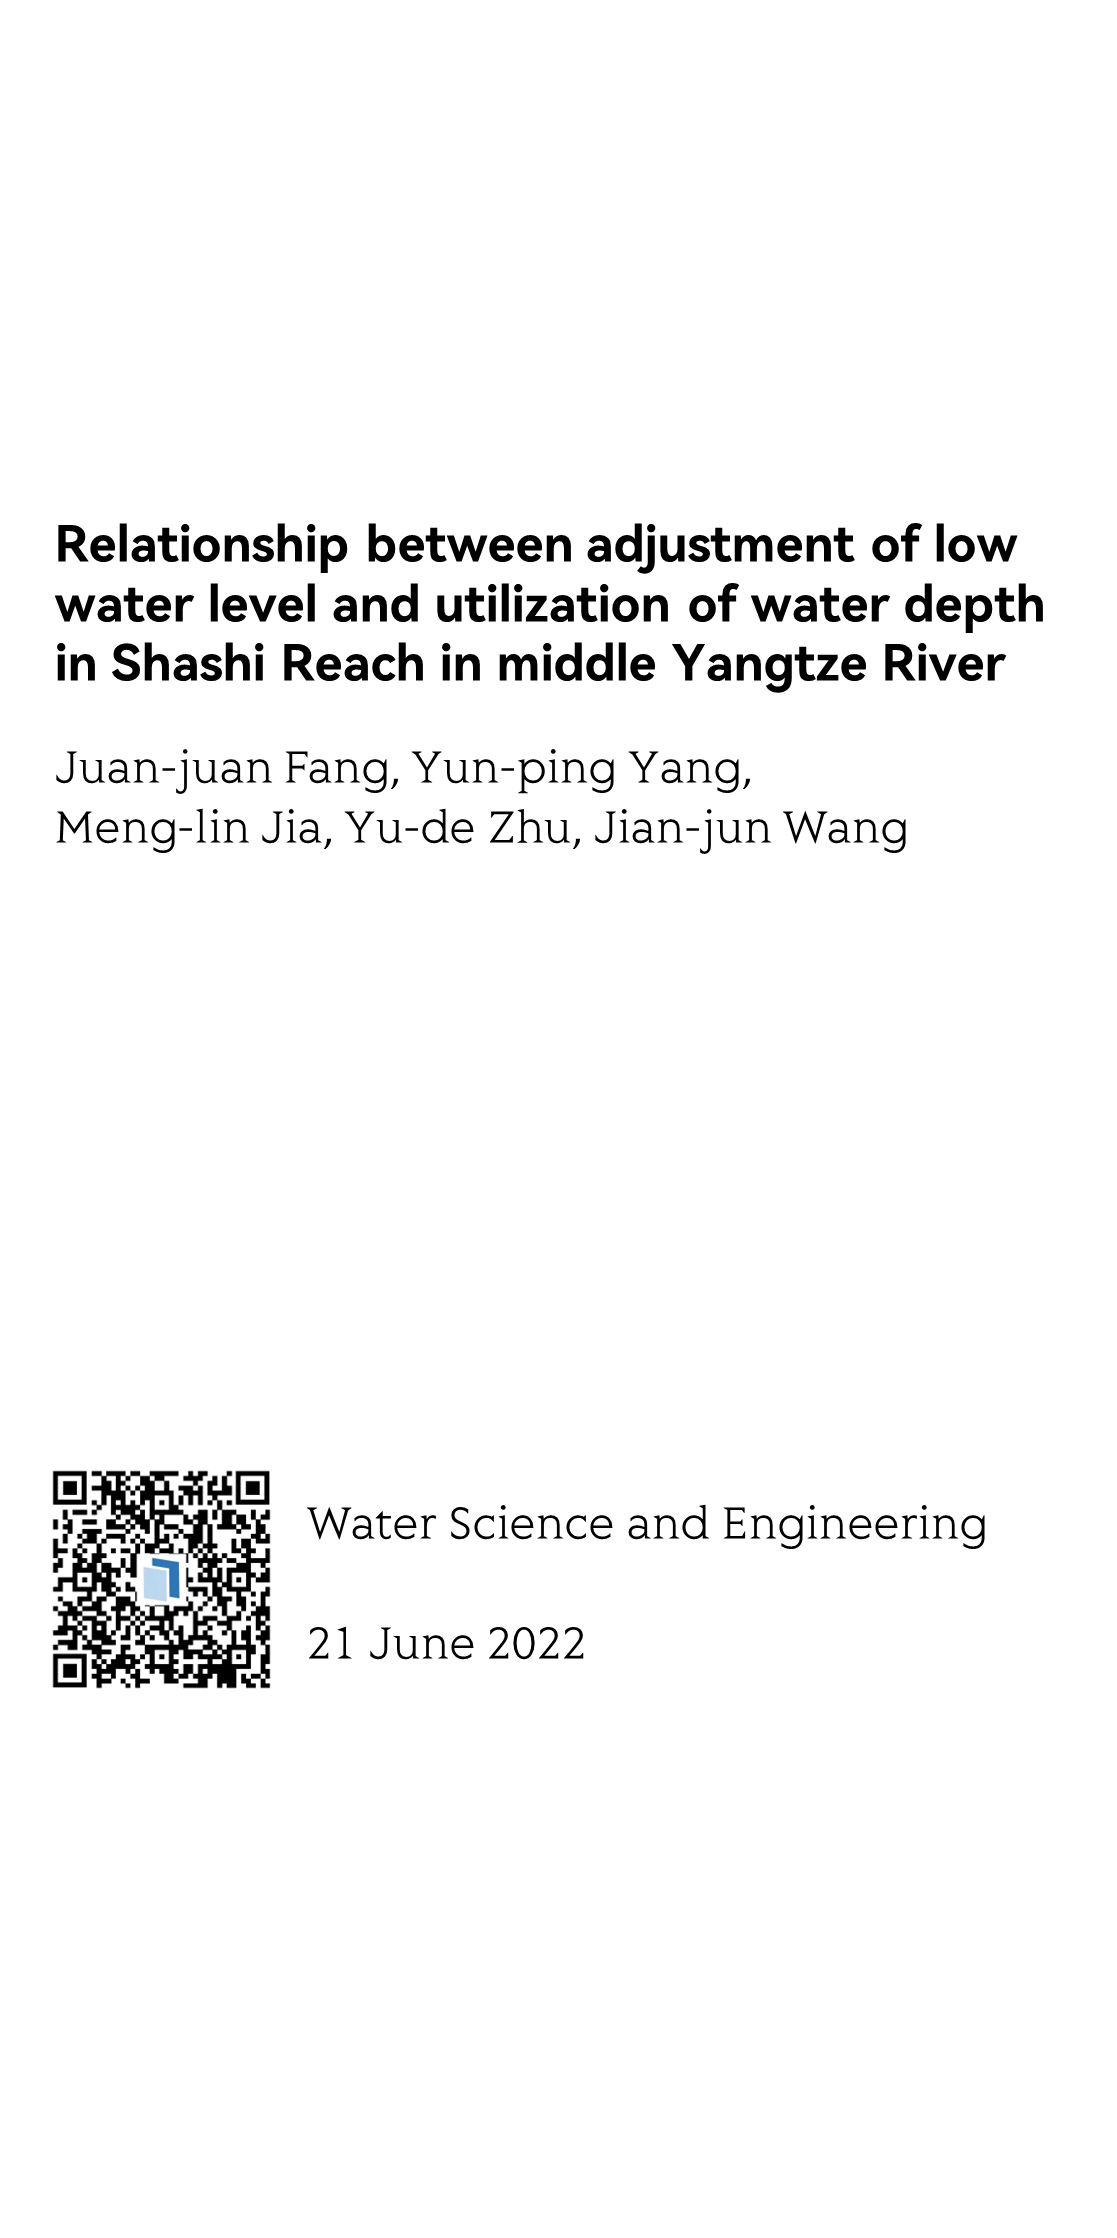 Relationship between adjustment of low water level and utilization of water depth in Shashi Reach in middle Yangtze River_1